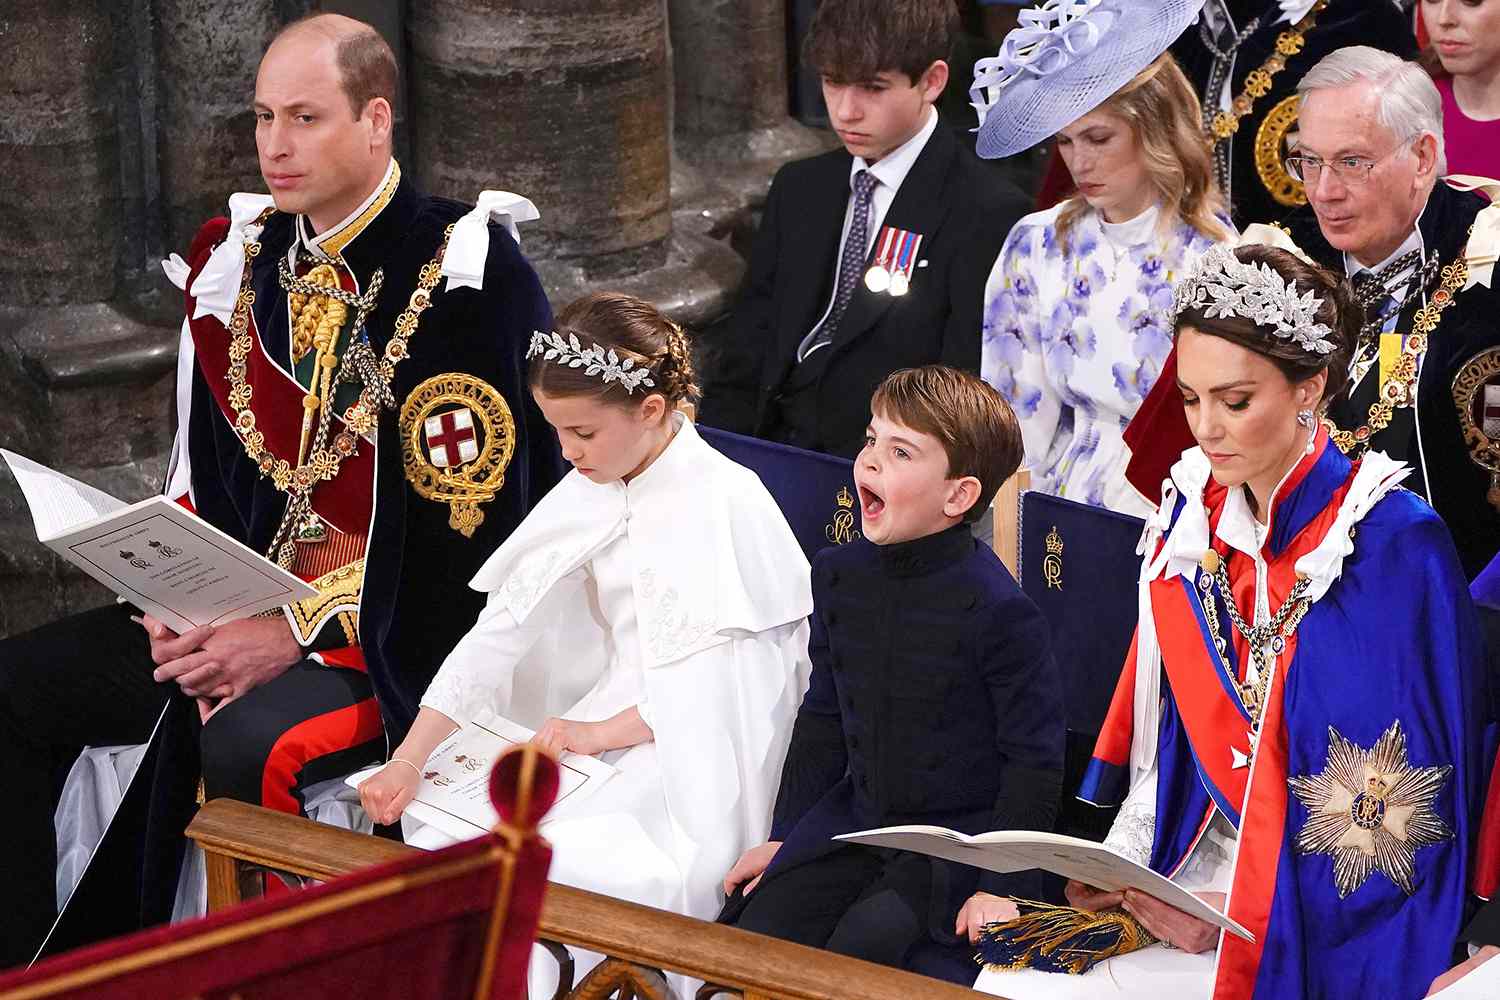 (From L) Britain's Prince William, Prince of Wales, Princess Charlotte, Prince Louis and Britain's Catherine, Princess of Wales attend the coronations of Britain's King Charles III and Britain's Camilla, Queen Consort at Westminster Abbey in central London on May 6, 2023.